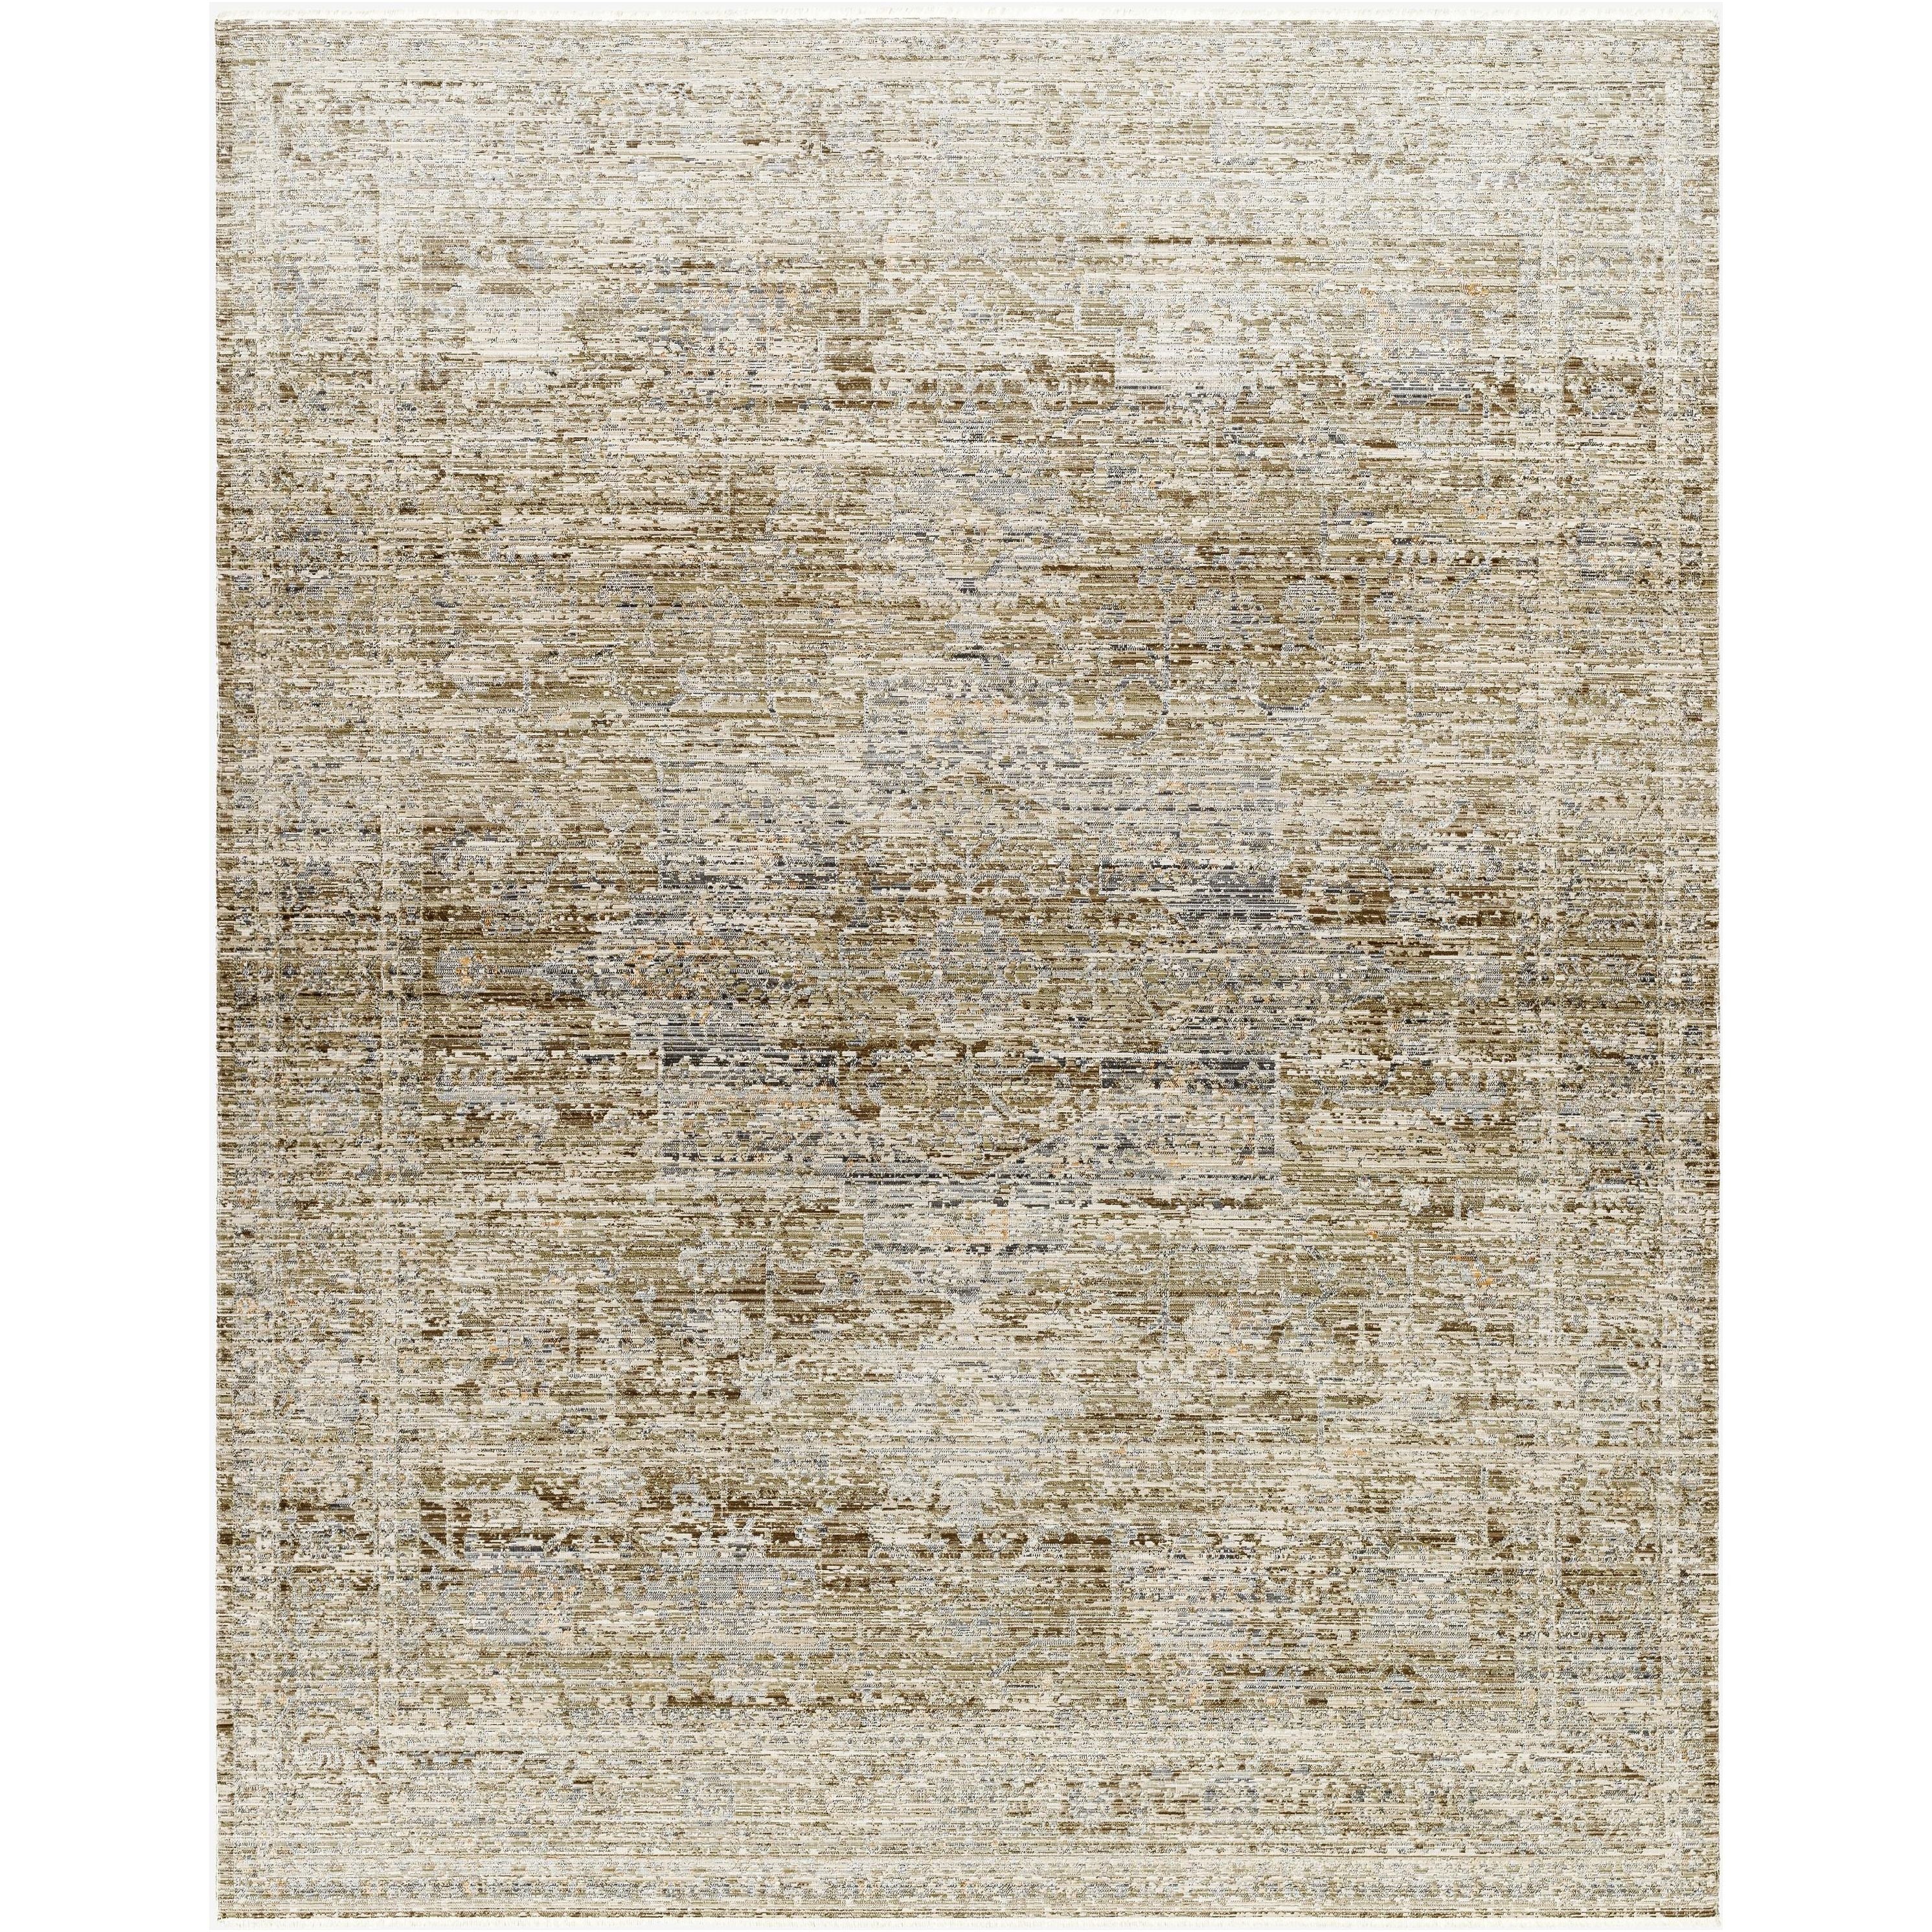 The Margaret area rug brings a touch of timeless beauty to any room. This special collaboration piece from Becki Owens x Surya is a stunning addition to your home. With a distressed feel, the rug evokes a feeling of antique charm. Crafted with polyester, the rug features beautiful neutral tones and is perfect for high traffic areas. Amethyst Home provides interior design, new home construction design consulting, vintage area rugs, and lighting in the Park City metro area.